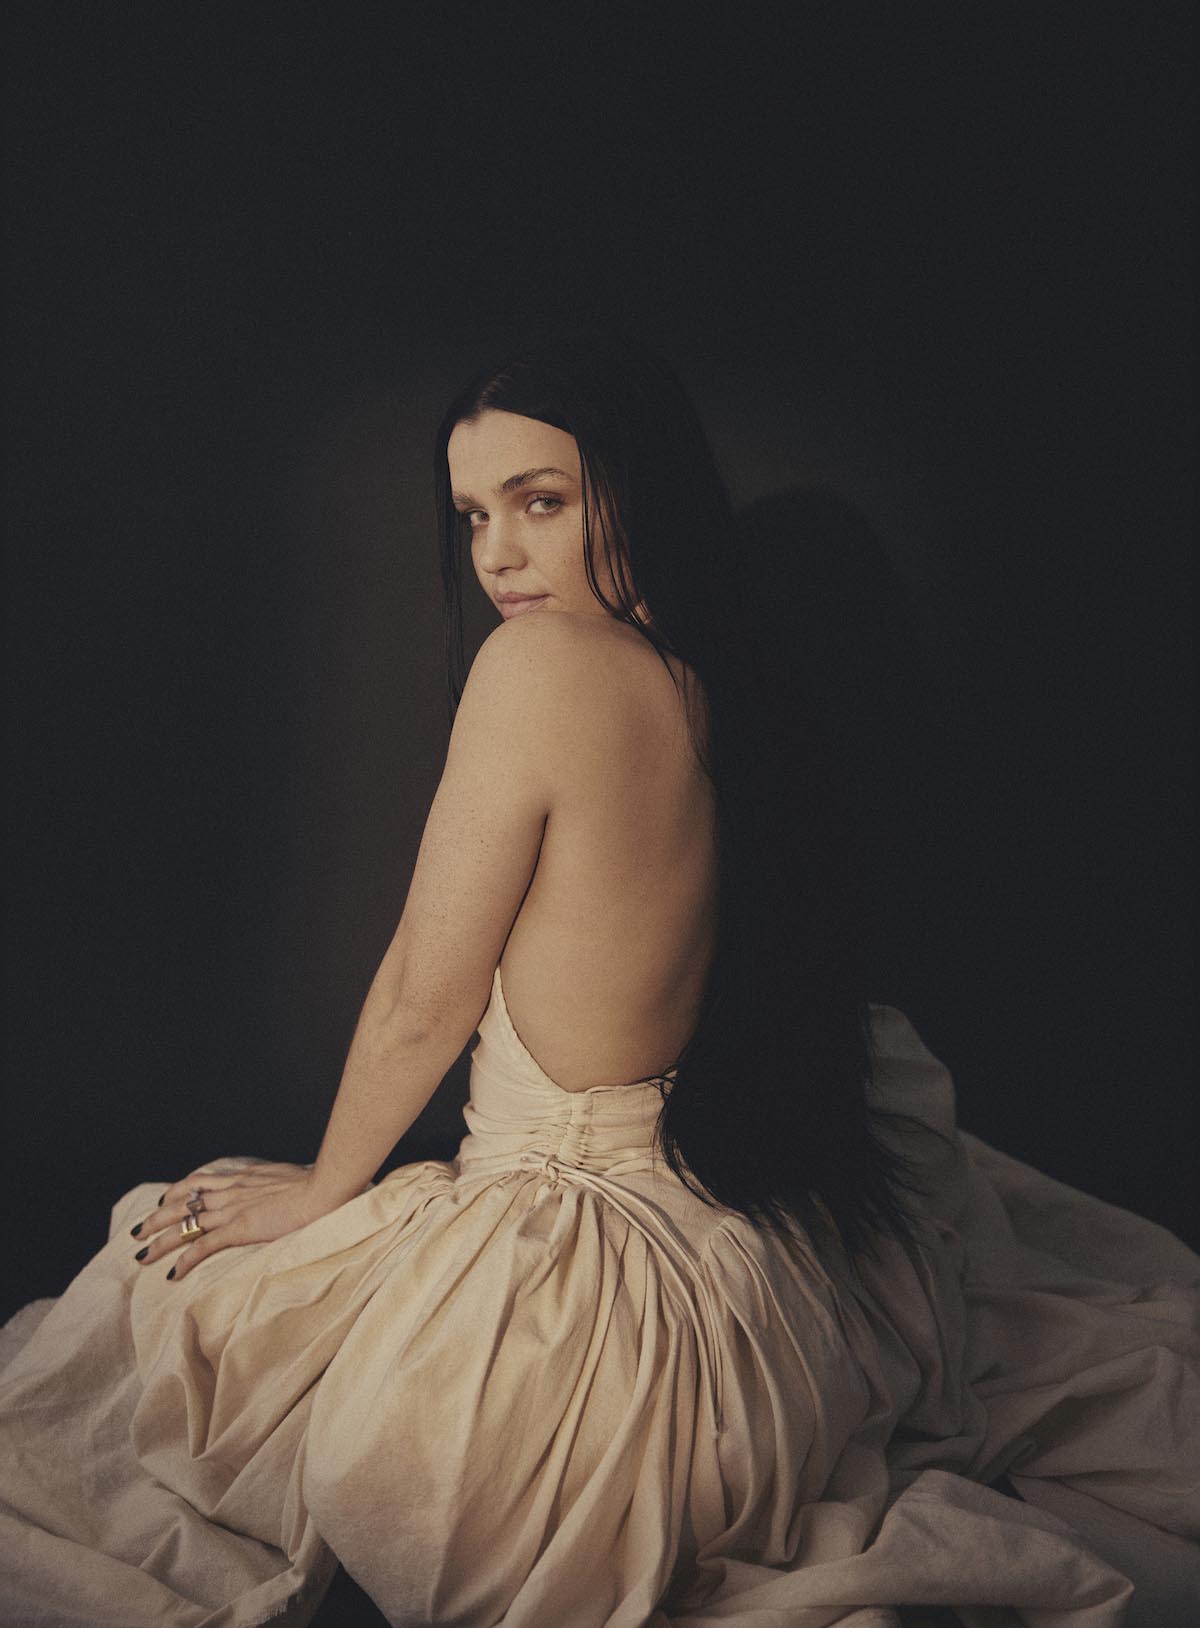 Young, white woman sitting on the floor is seen from behind and turns her head to look at the camera over her left, naked shoulder. ARY has long black hair that blends into the black background. She wears a cream-coloured, backless, shoulderless dress draped over her legs and the floor. She rests her left hand on her left leg.